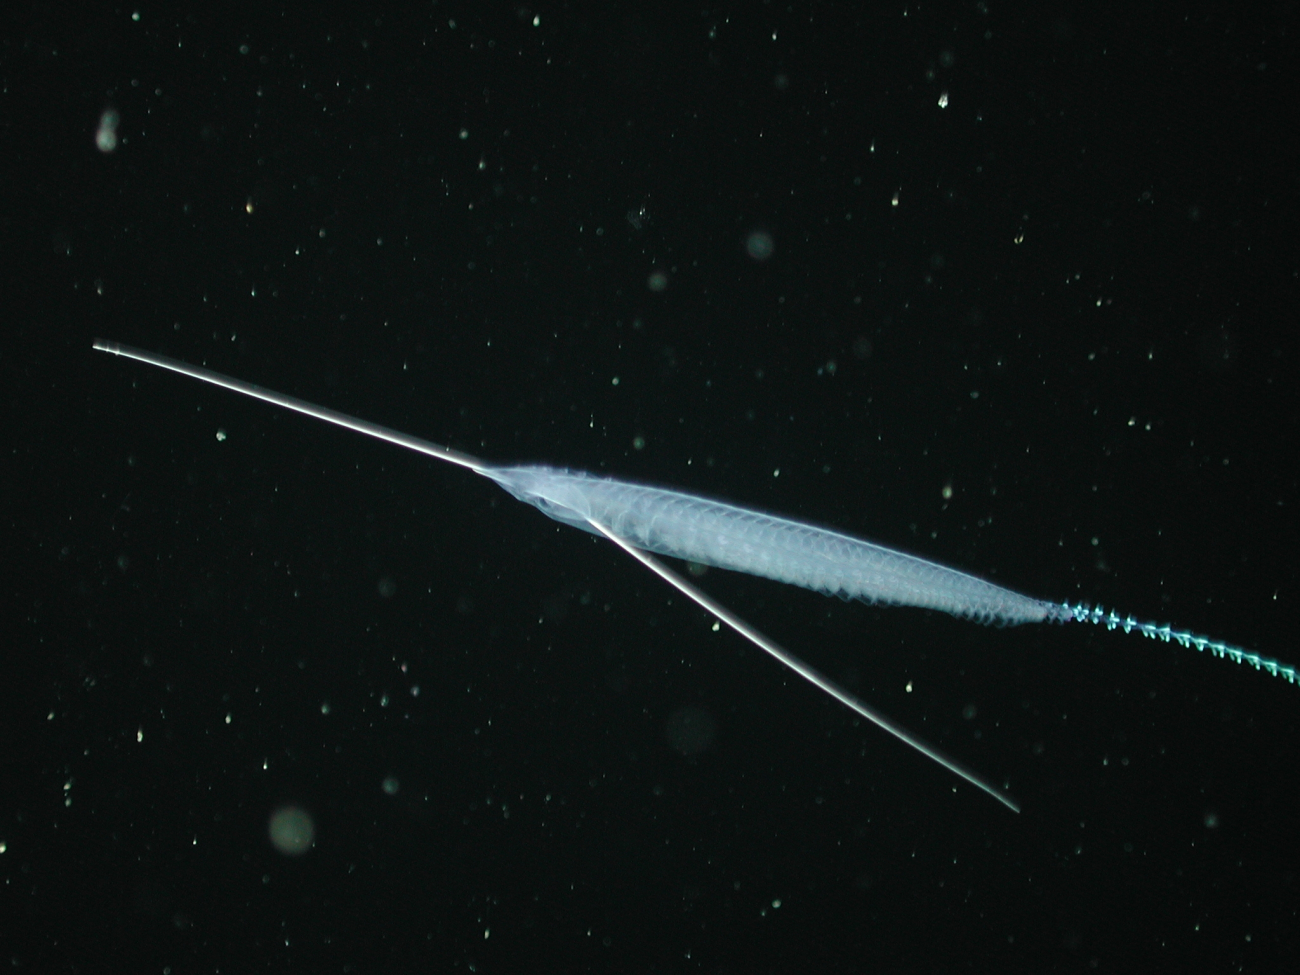 A siphonophore?